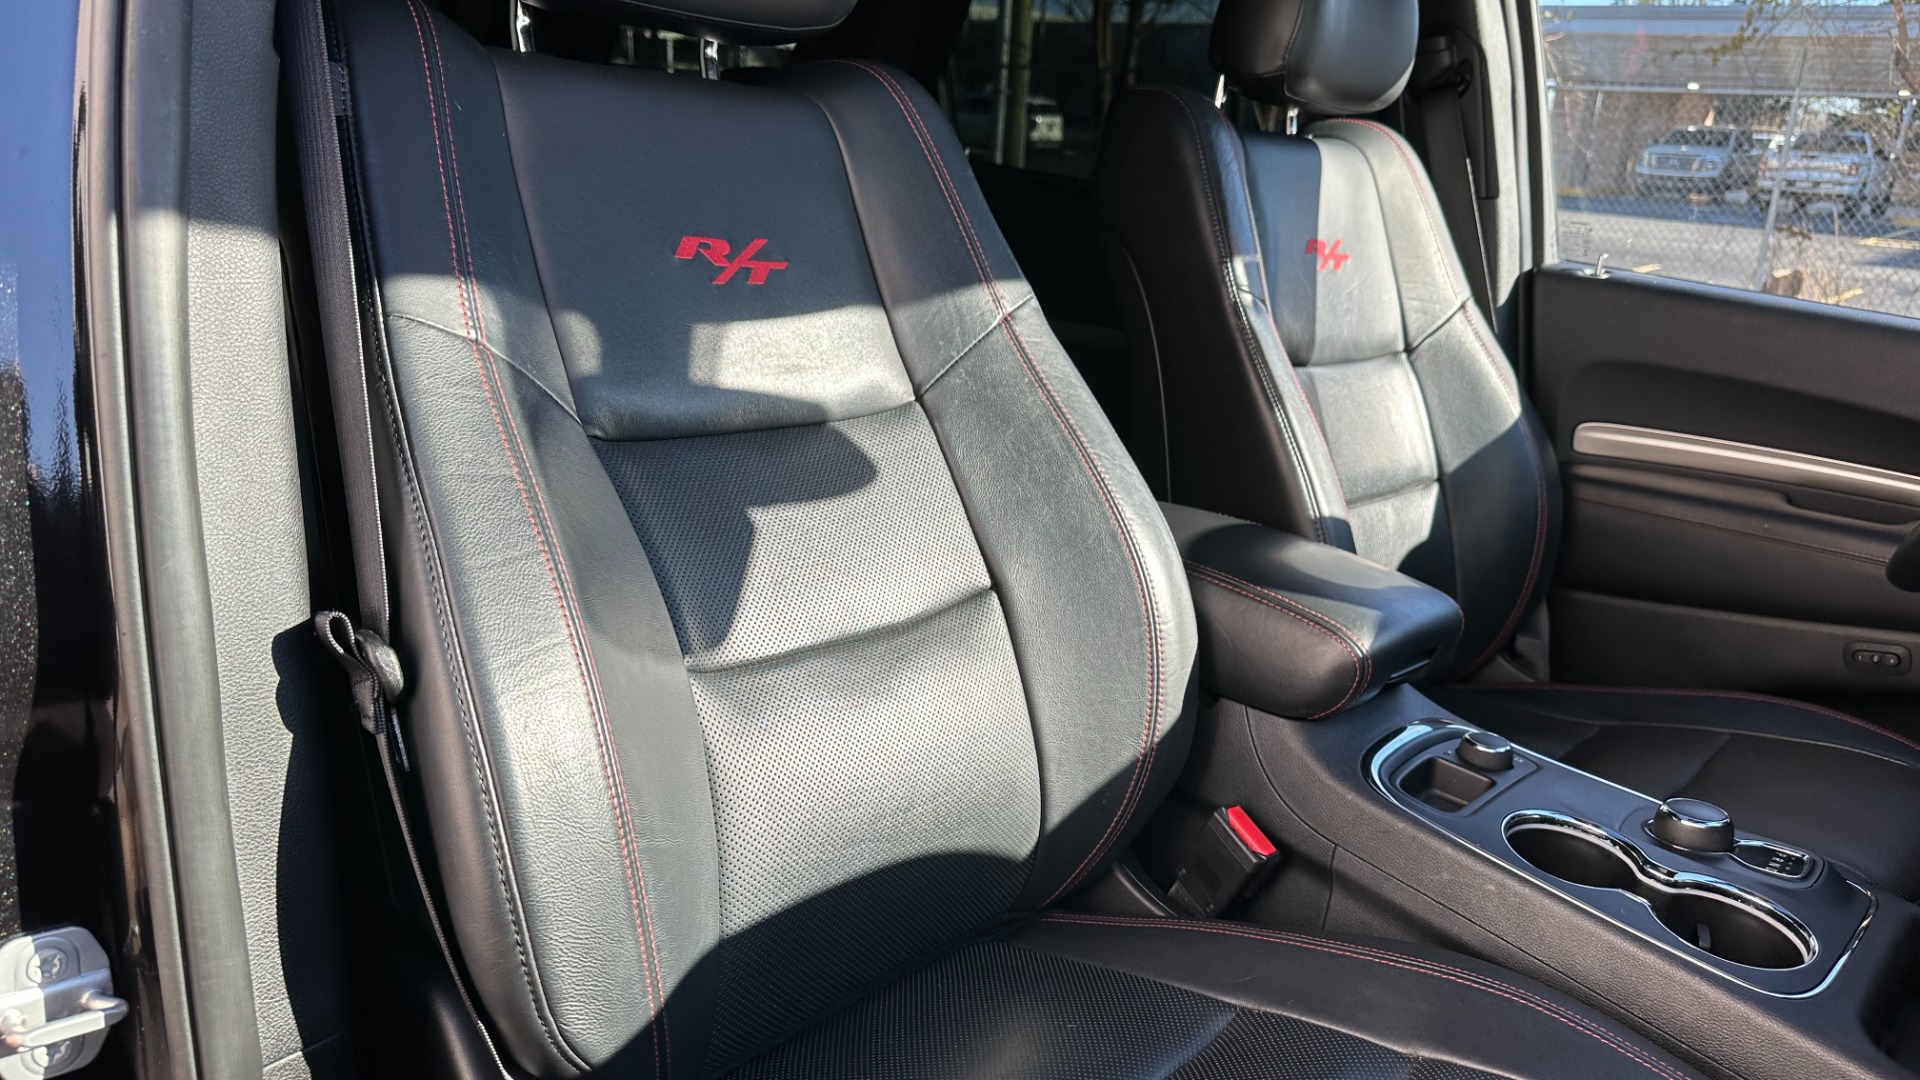 Used 2015 Dodge Durango R/T / HEMI V8 / CAPTAINS CHAIRS / 3 ROW SEATING / TECH PKG / NAPPA LEATHER  for sale $23,995 at Formula Imports in Charlotte NC 28227 42